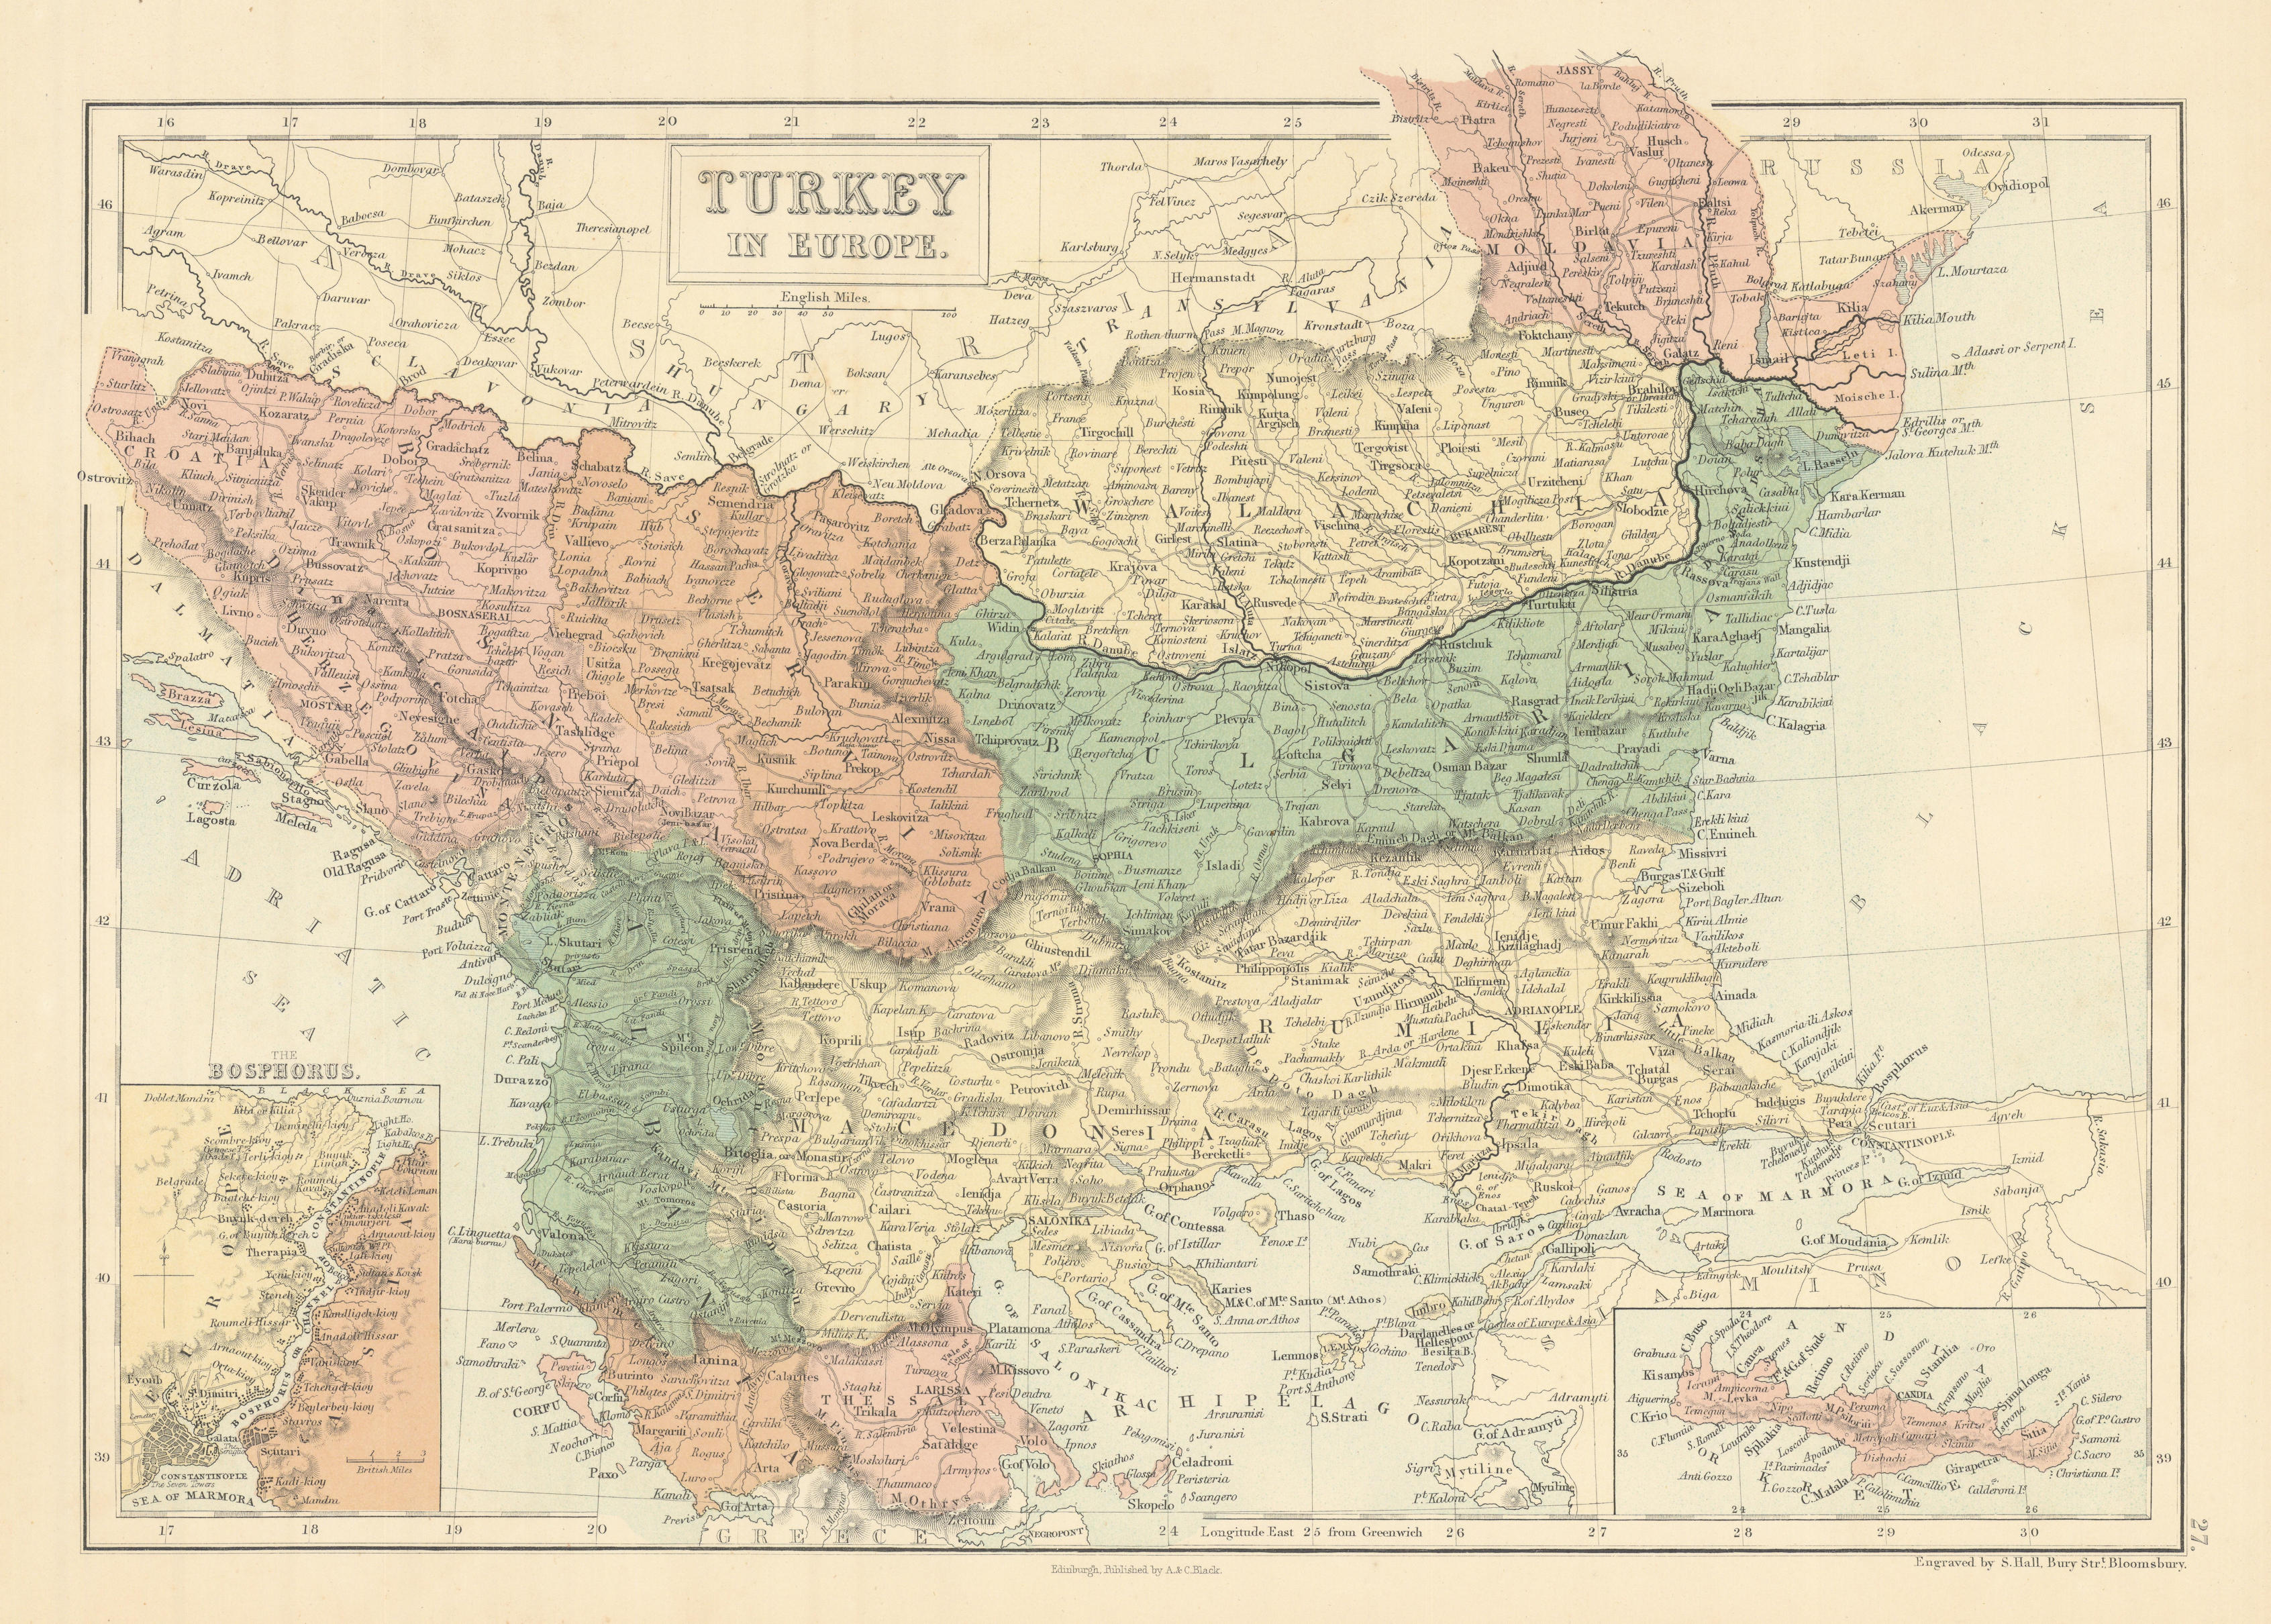 Associate Product Turkey in Europe. Inset the Bosphorus. Balkans. SIDNEY HALL 1862 old map